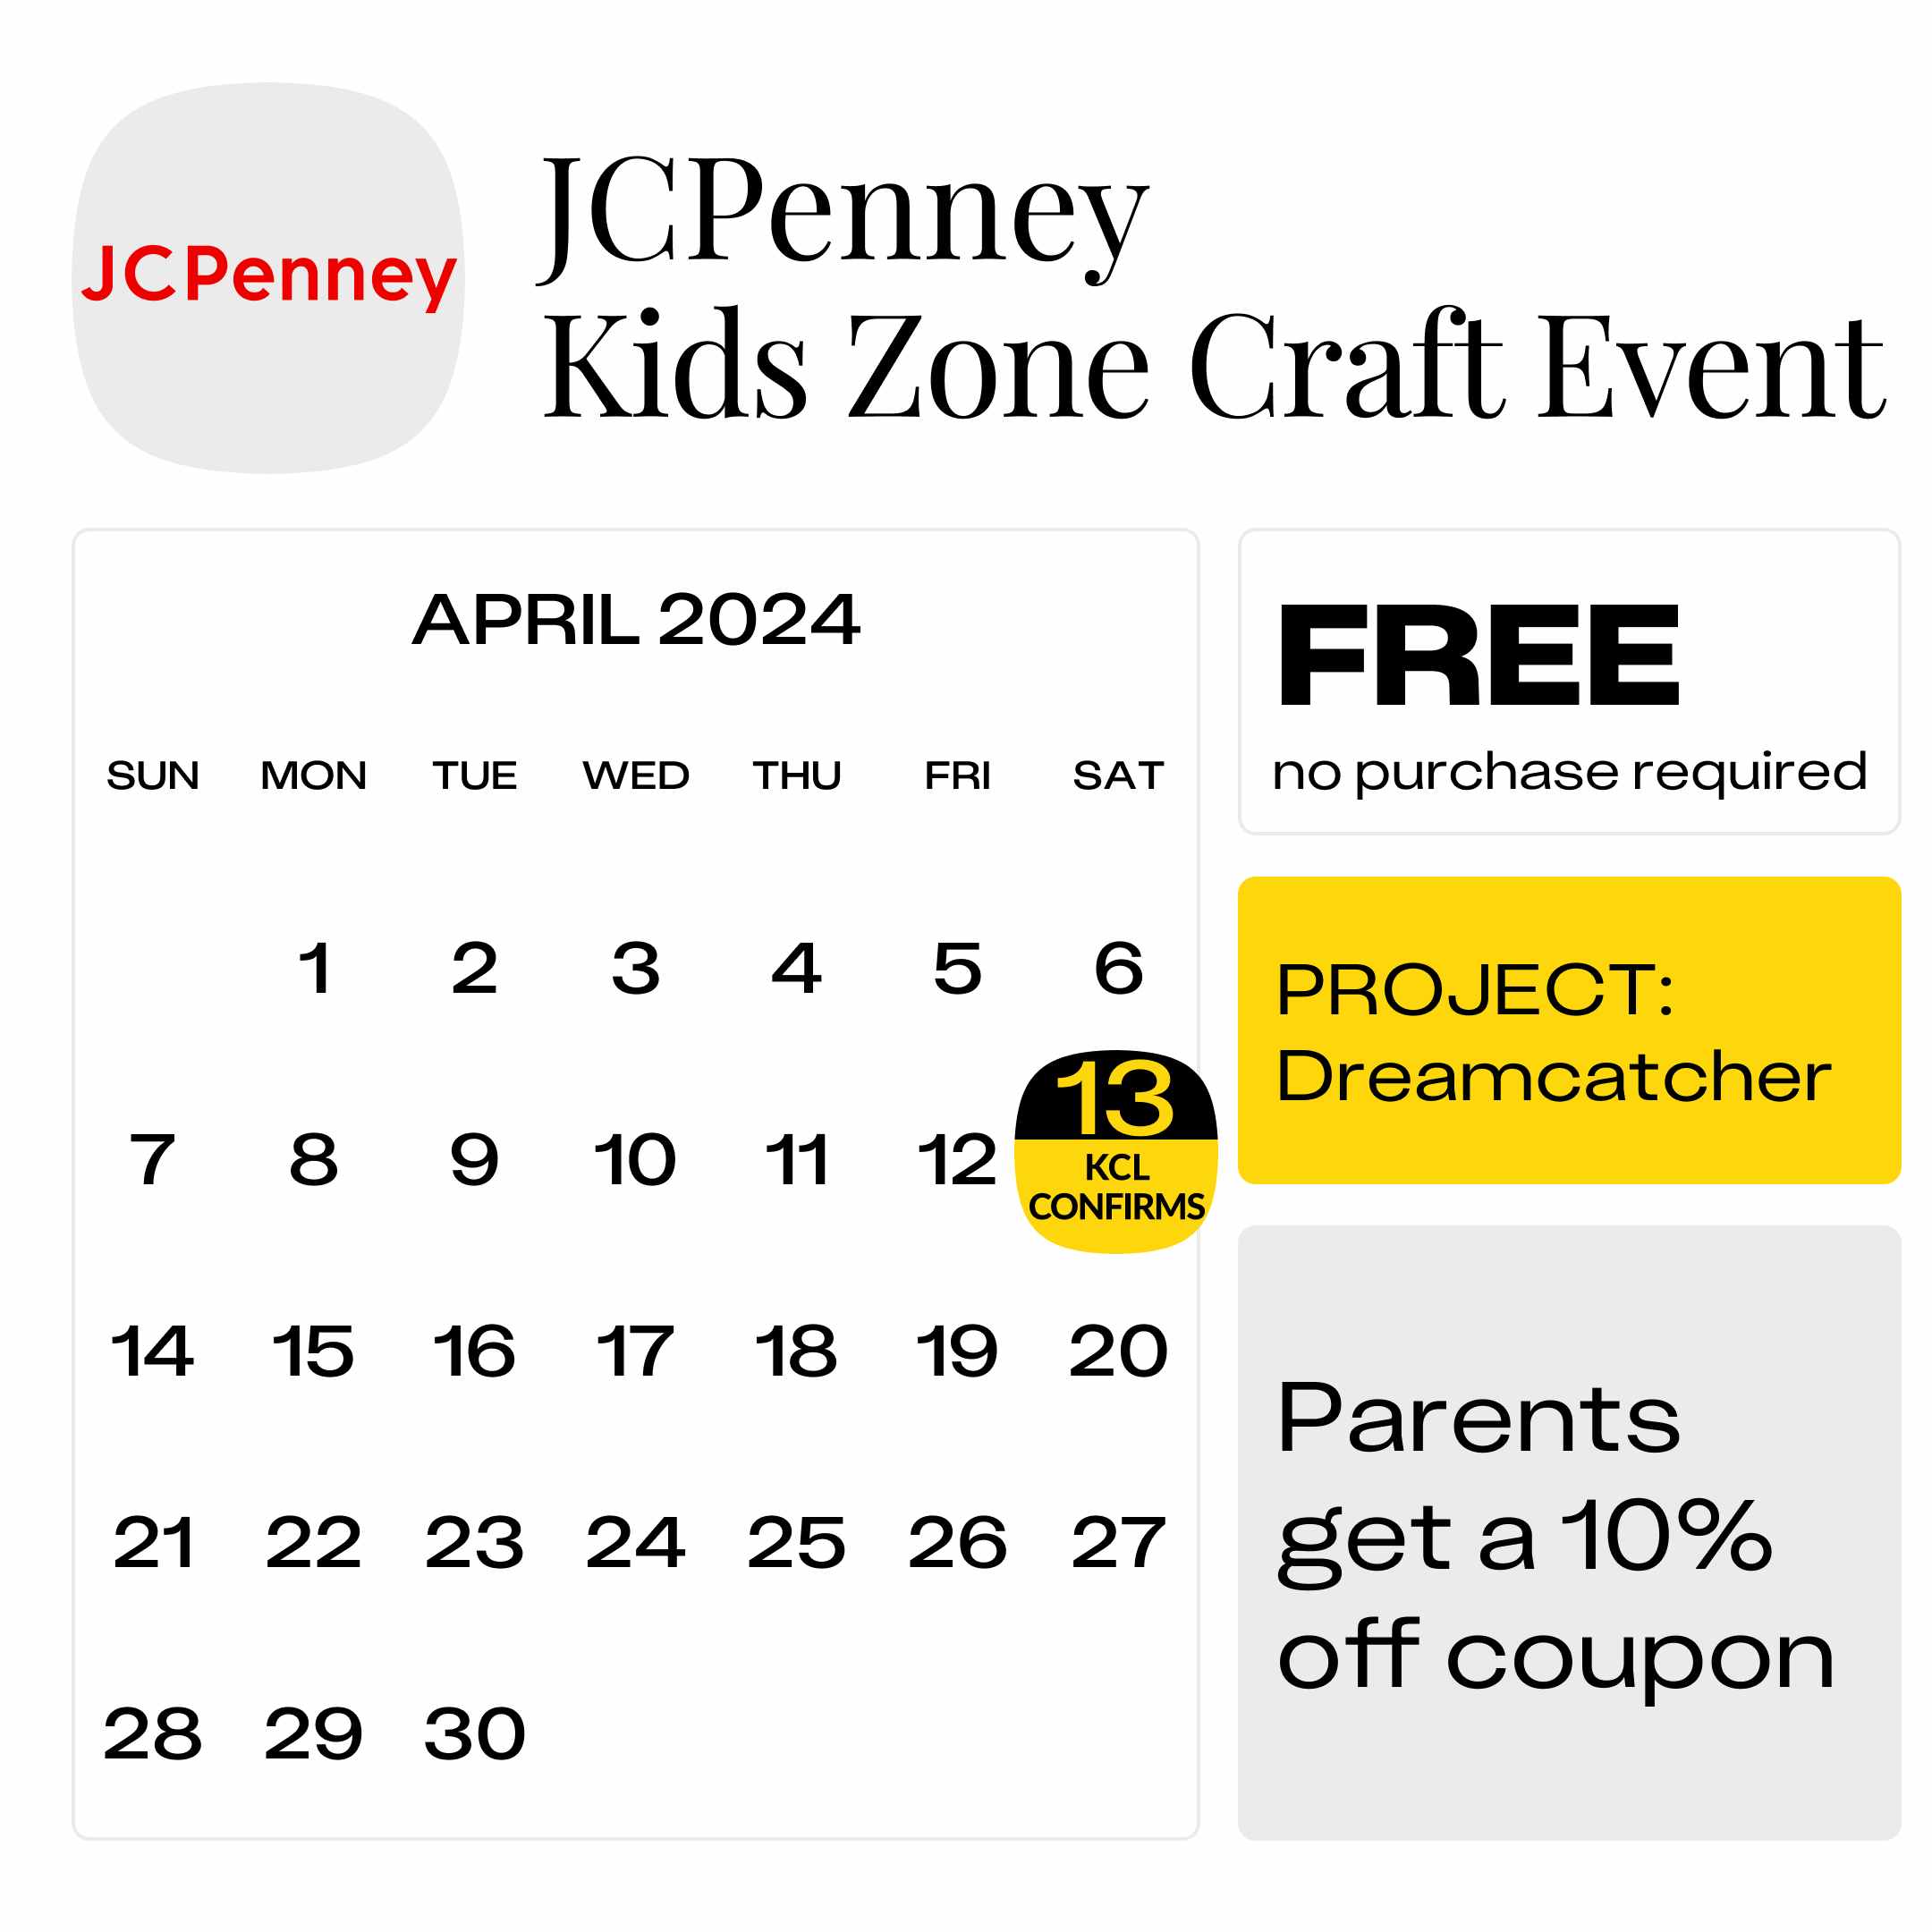 JCPenney Kids Zone  Shop & Save with Exclusive In-Store Coupon